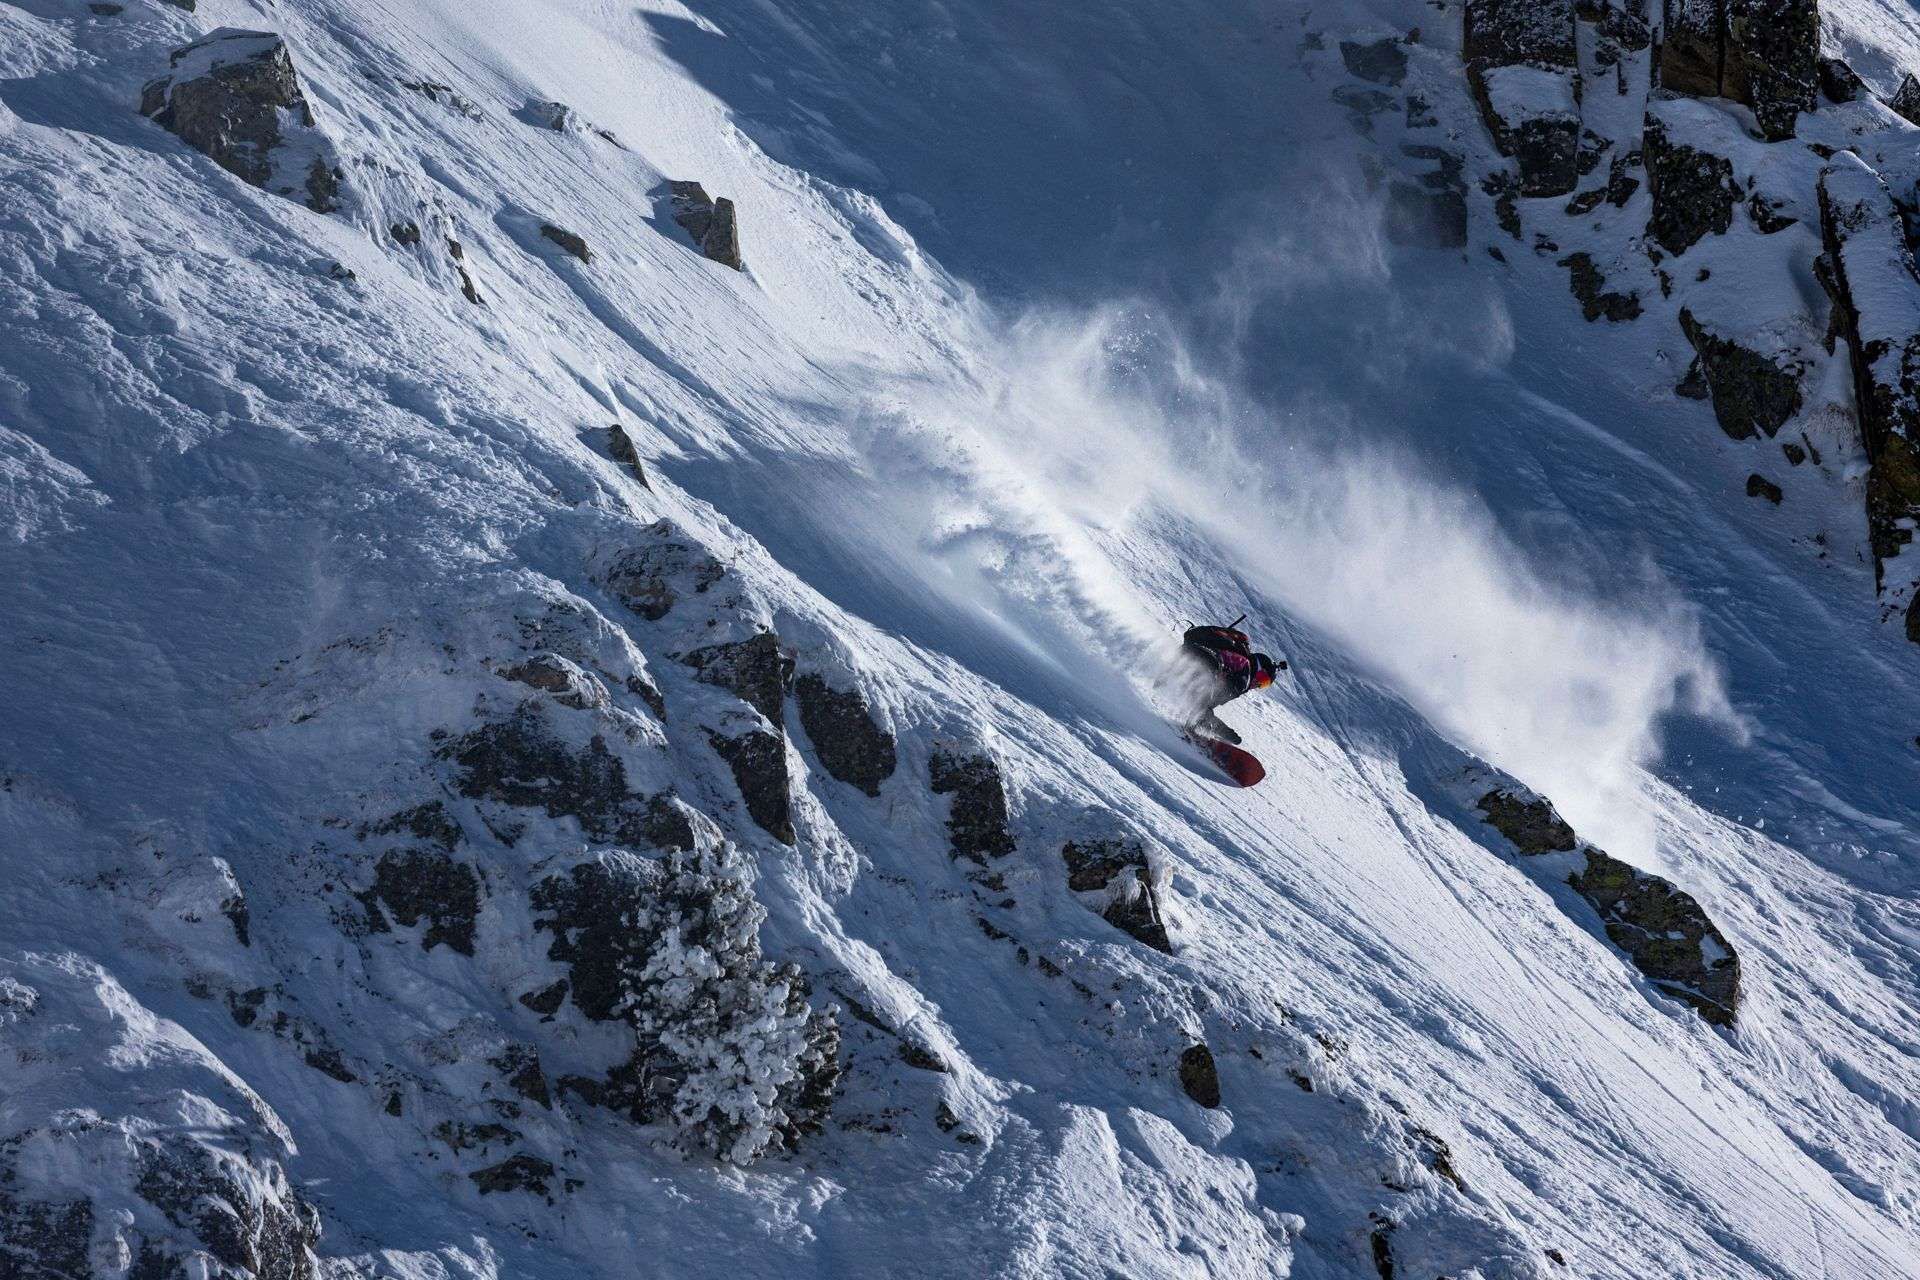 Michael Mawn wins the season opener of the Freeride World Tour in Baqueira Beret